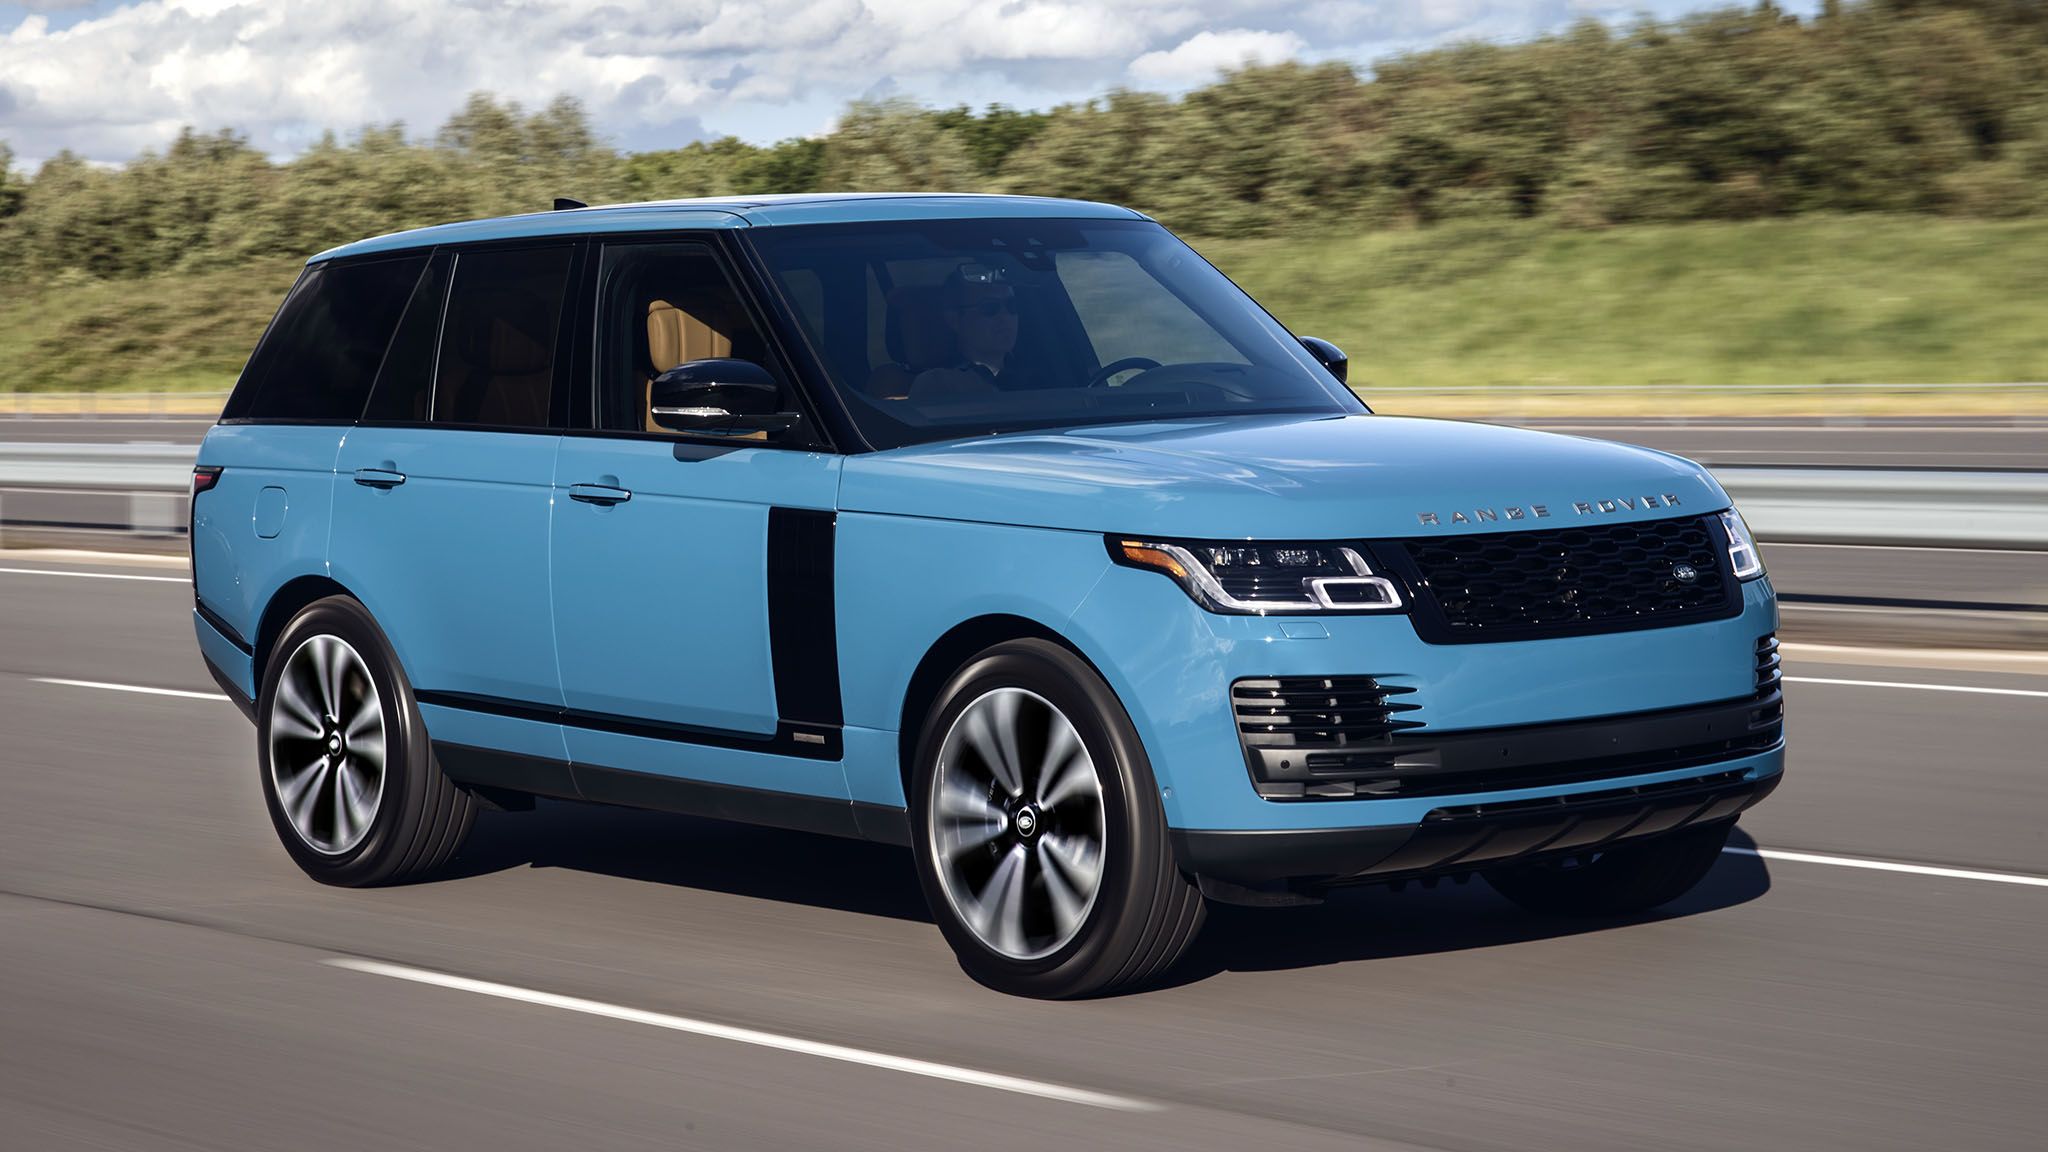 The 2021 Range Rover Goes Retro In Honor of Its Golden Anniversary